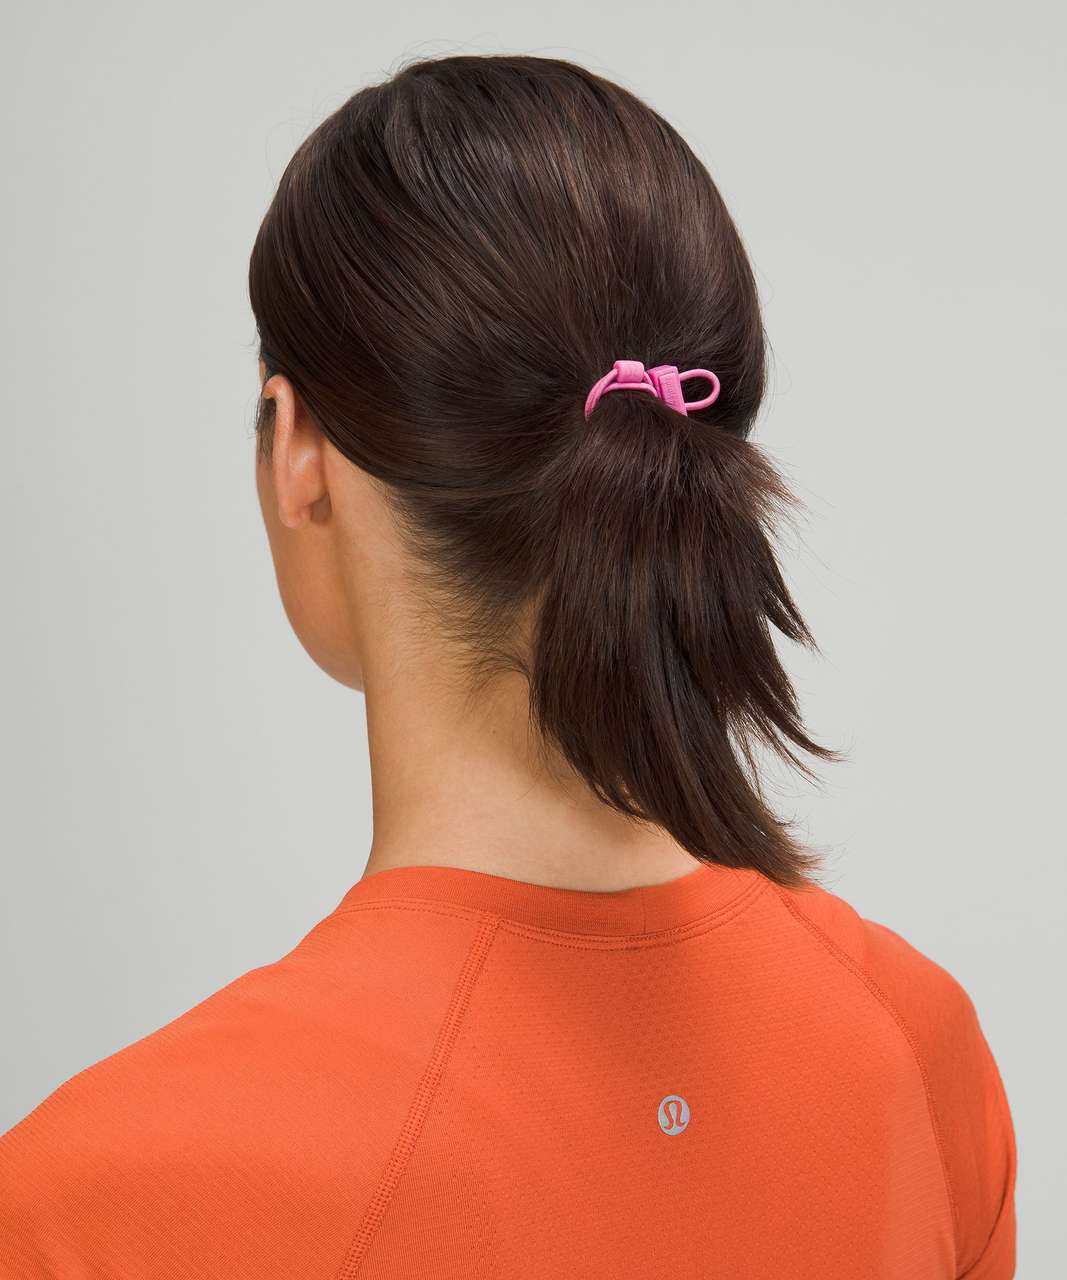 Lululemon Adjustable Hair Tie 3 Pack - Smoky Red / Warm Coral / Pink Blossom